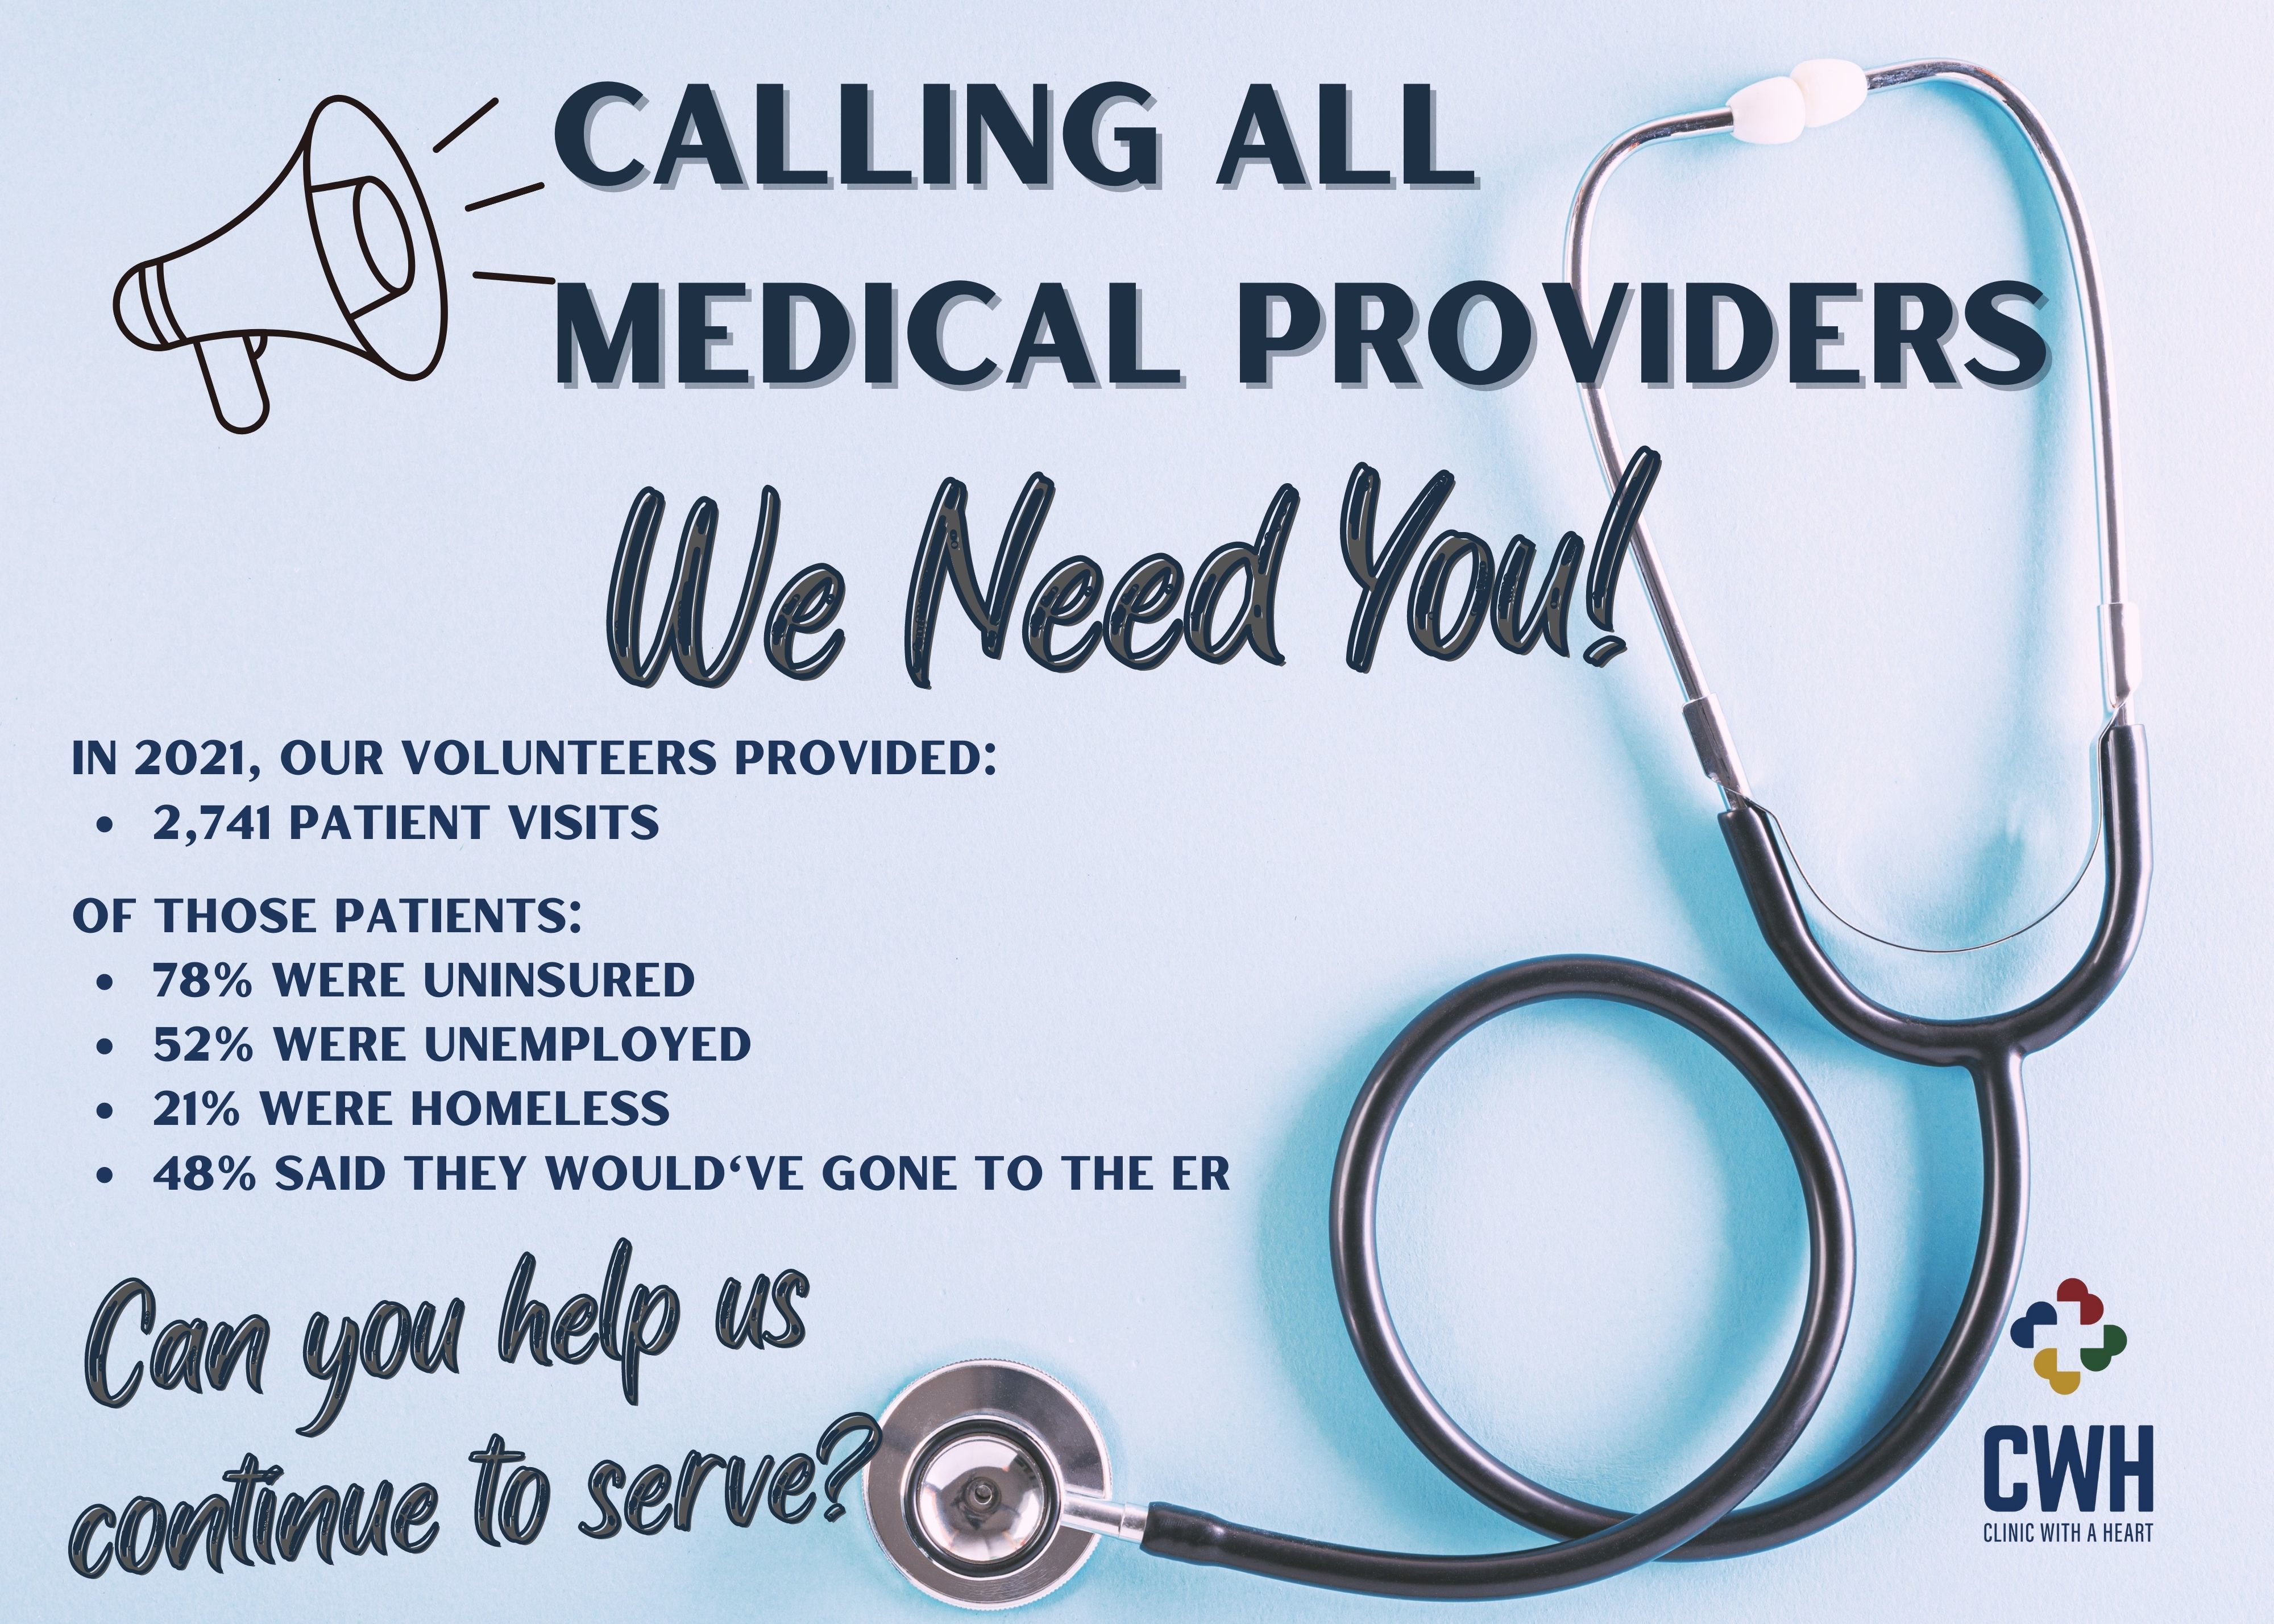 WE NEED MEDICAL PROVIDERS!